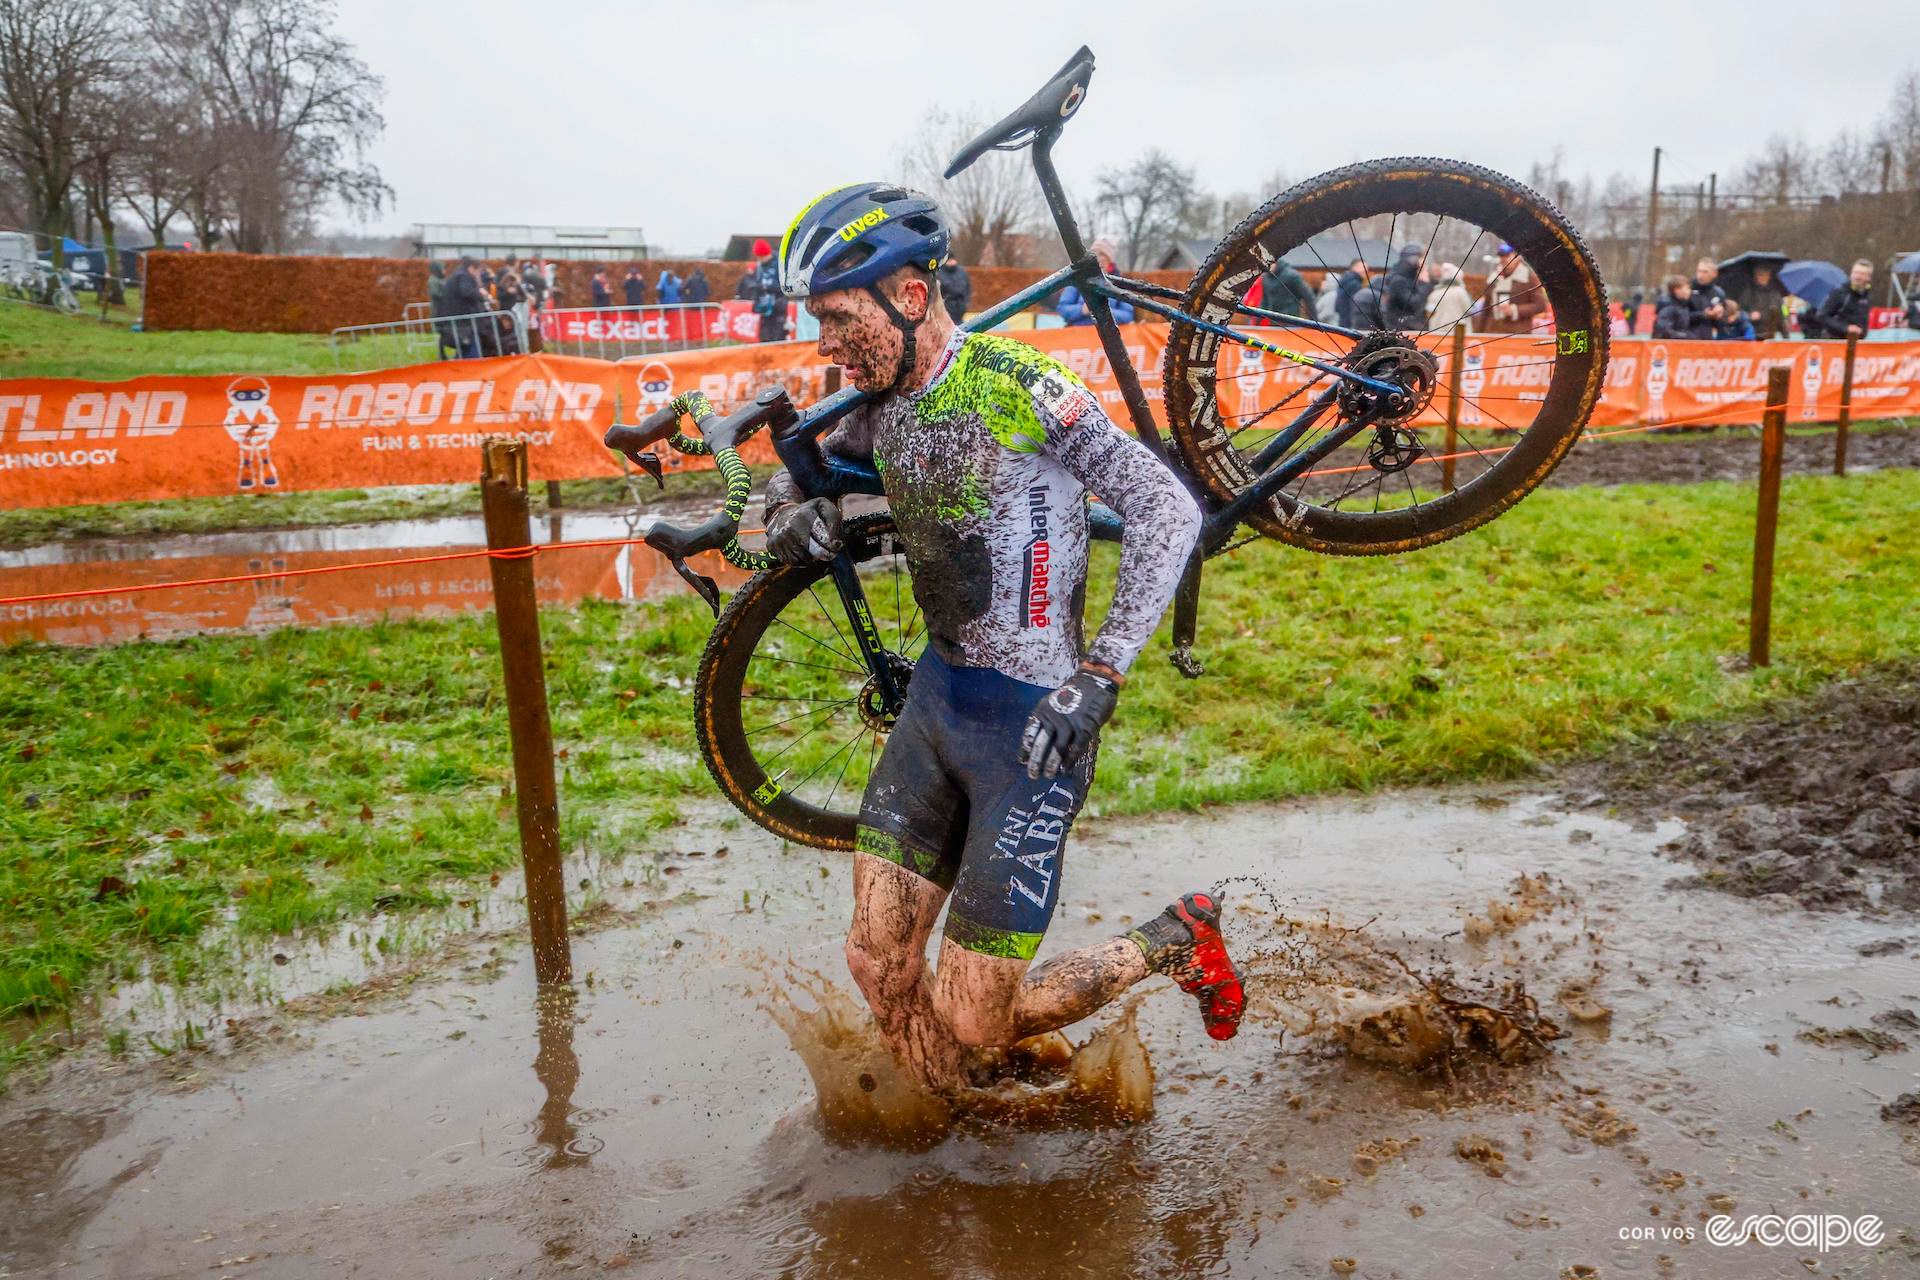 Thijs Aerts during a very wet and muddy Exact Cross Essen.